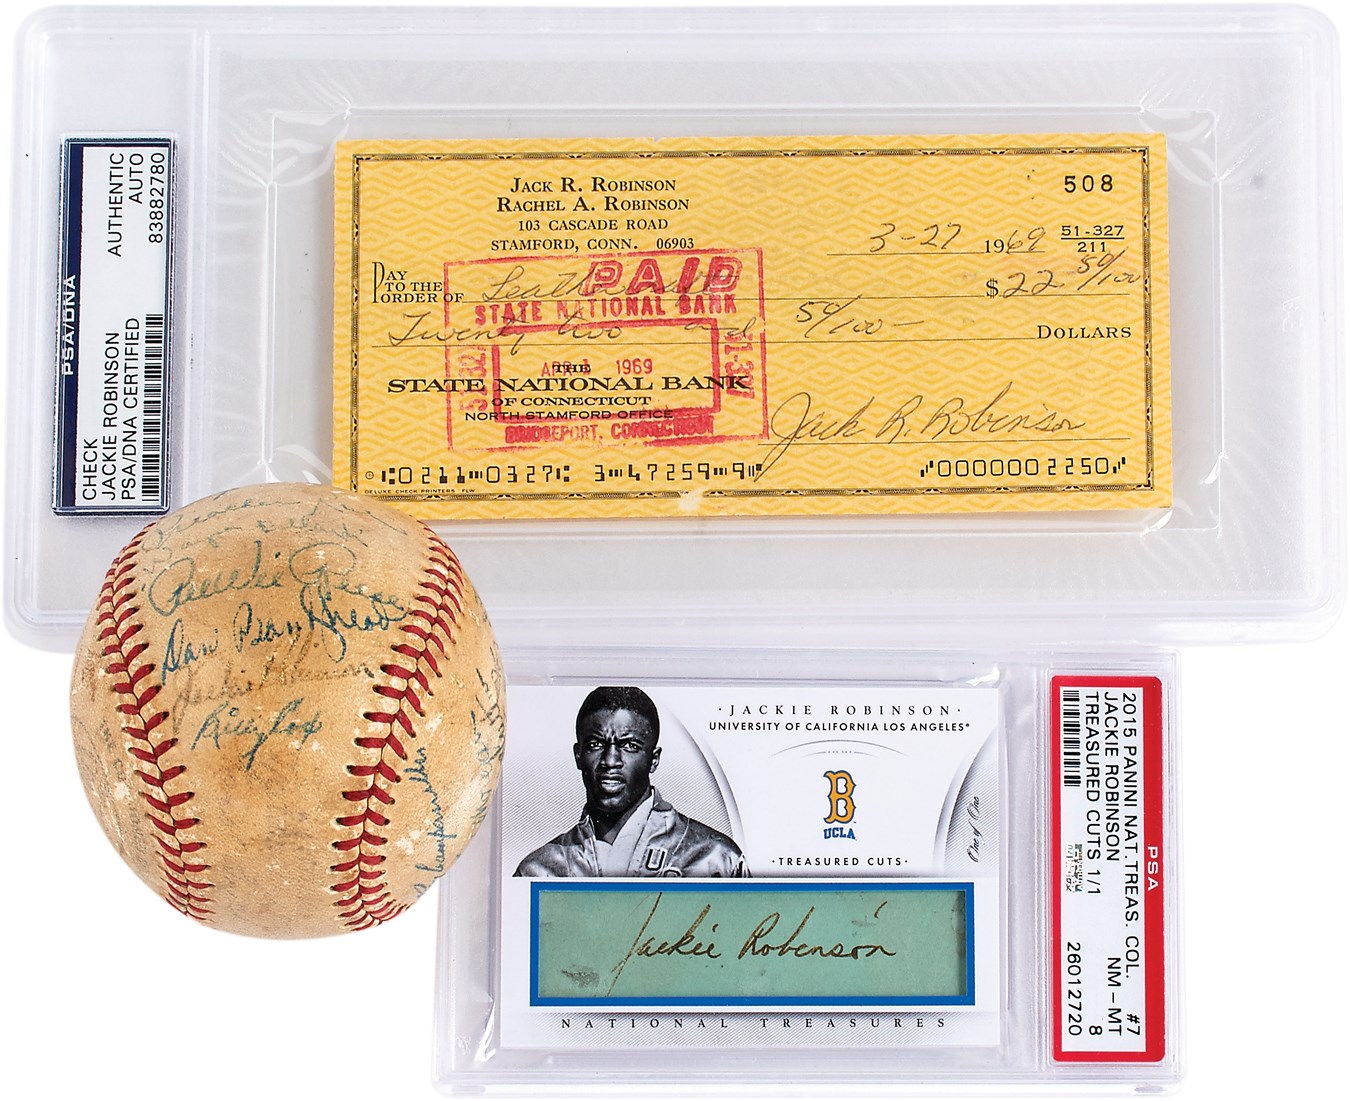 Baseball and Trading Cards - 2015 National Treasures Jackie Robinson 1/1 Autograph Card, Signed Check & 1950 Brooklyn Dodgers Team Ball (3)